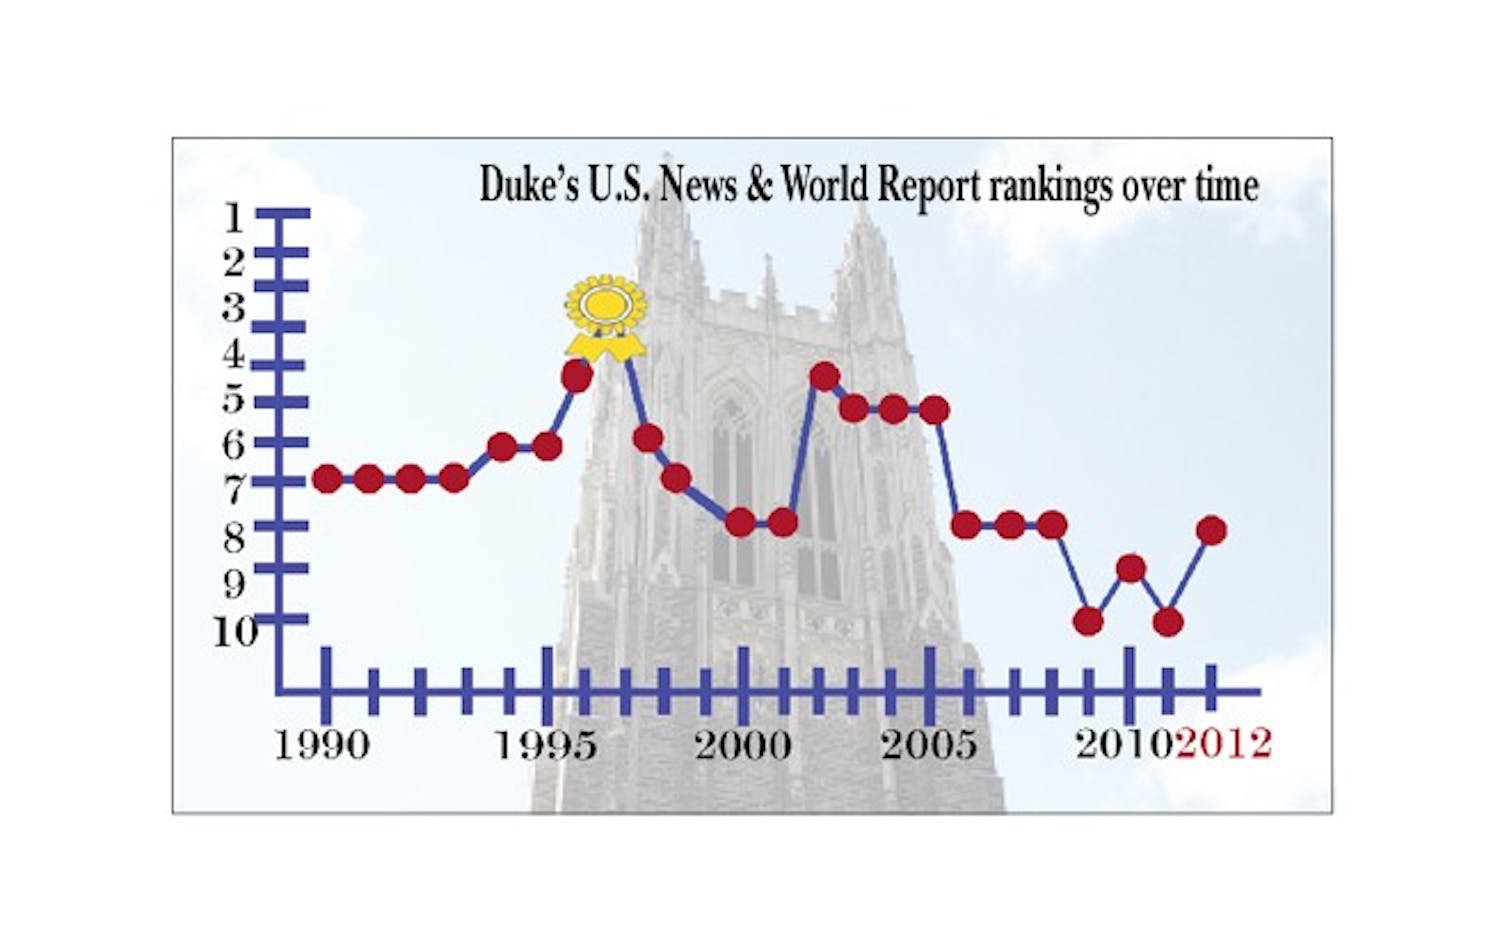 Duke’s rankings have fluctuated over the past two decades—with a peak as number three in 1997 and a low at number 10 in 2009 and 2011. This year, U.S. News & World Report ranks Duke as number eight.